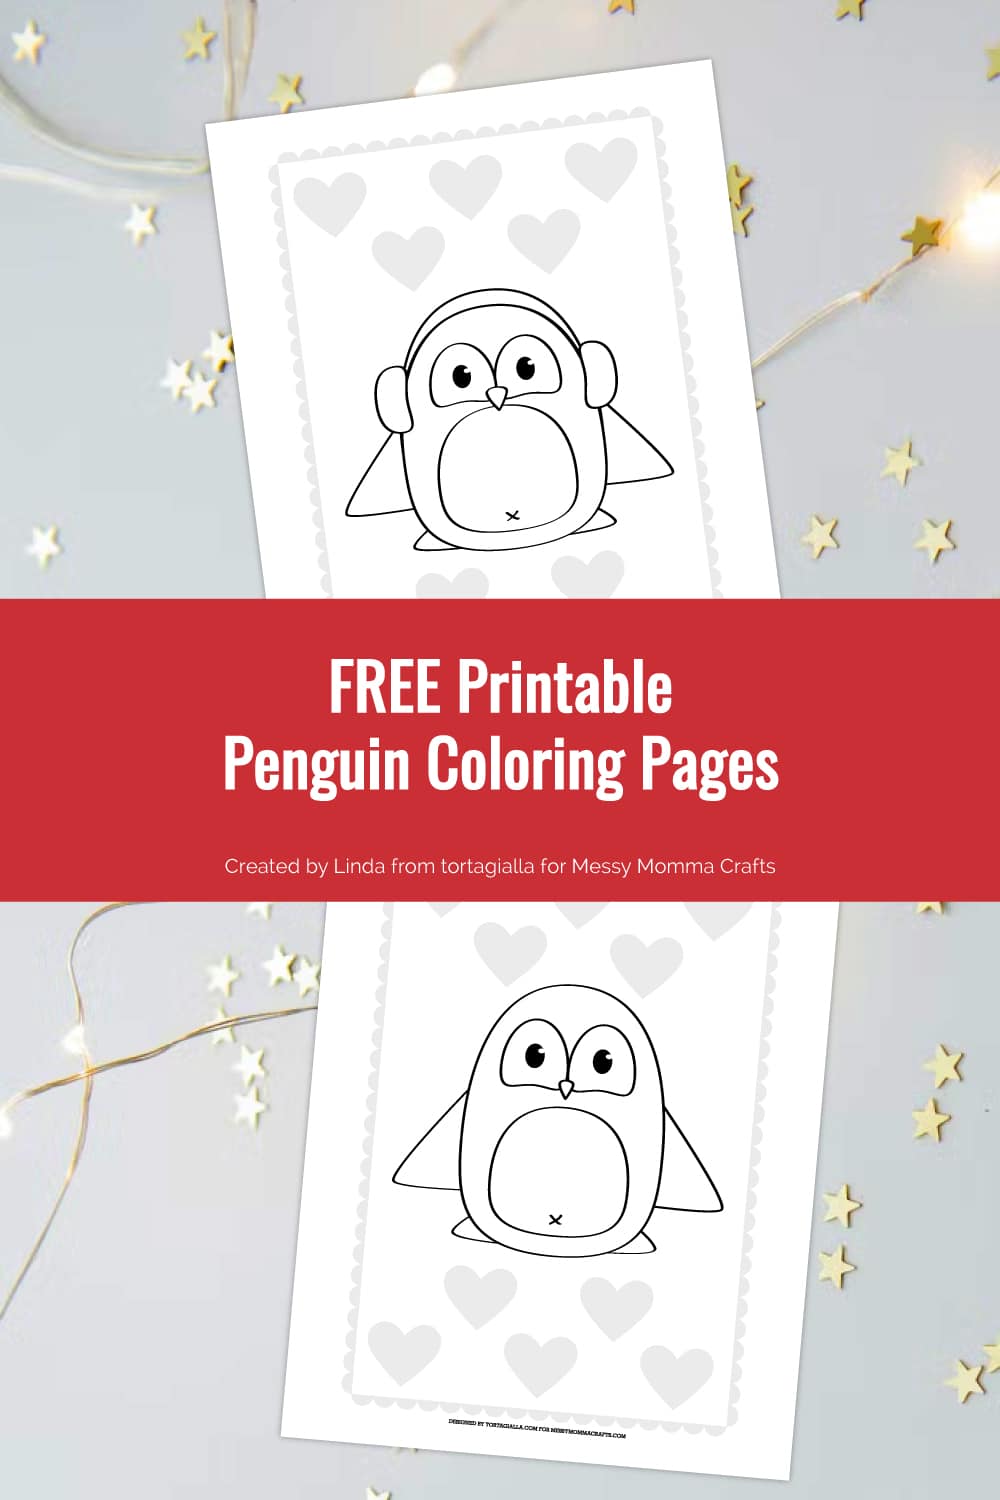 Preview of two penguin coloring pages for kids on white background with sprinkling of golden stars and fairy lights throughout.